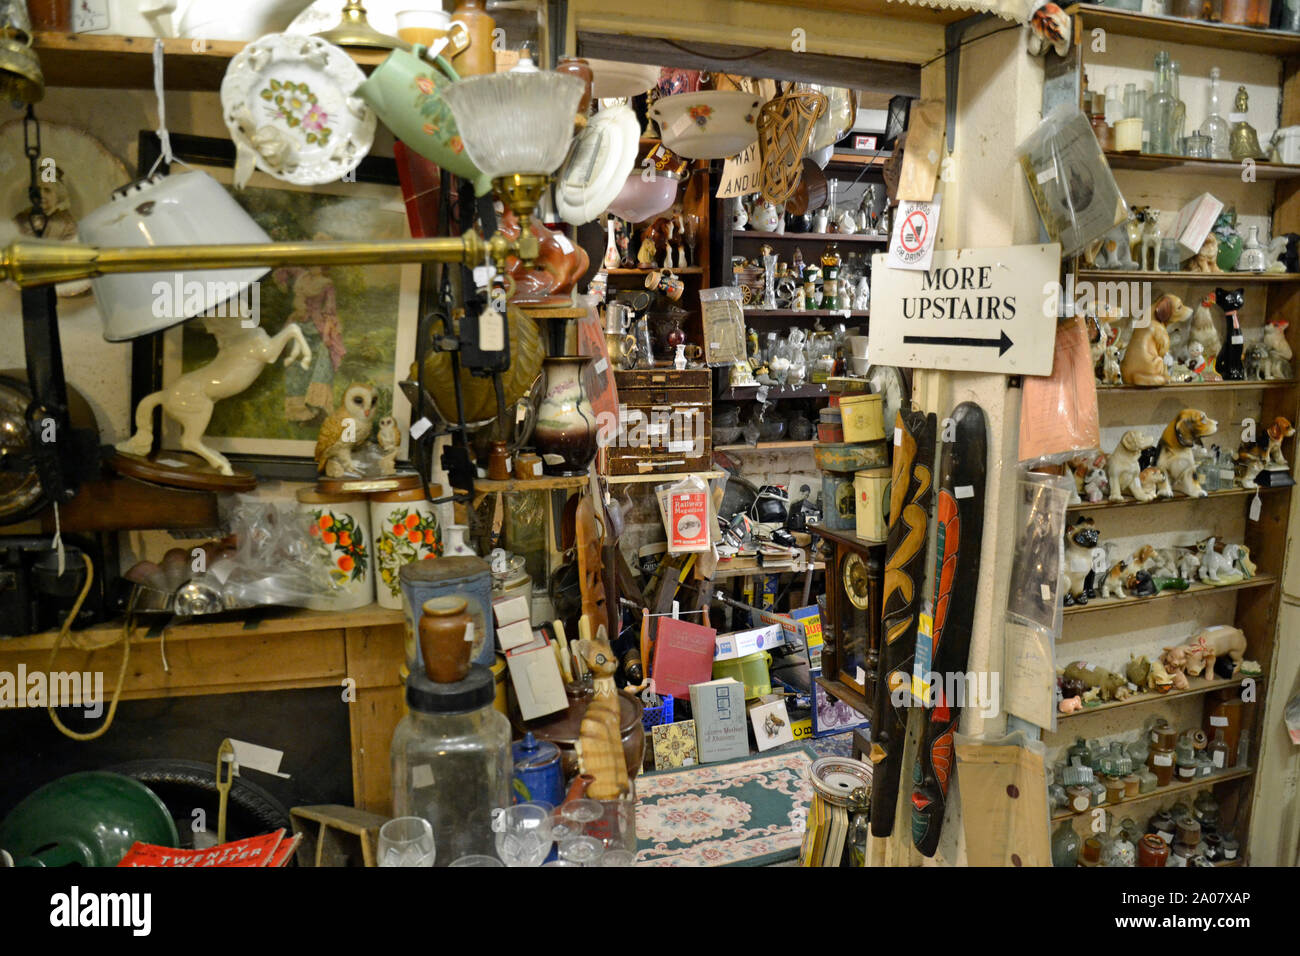 Knicks Knacks Antiques and Curiosities shop at Sutton on Sea, Lincolnshire, UK Stock Photo